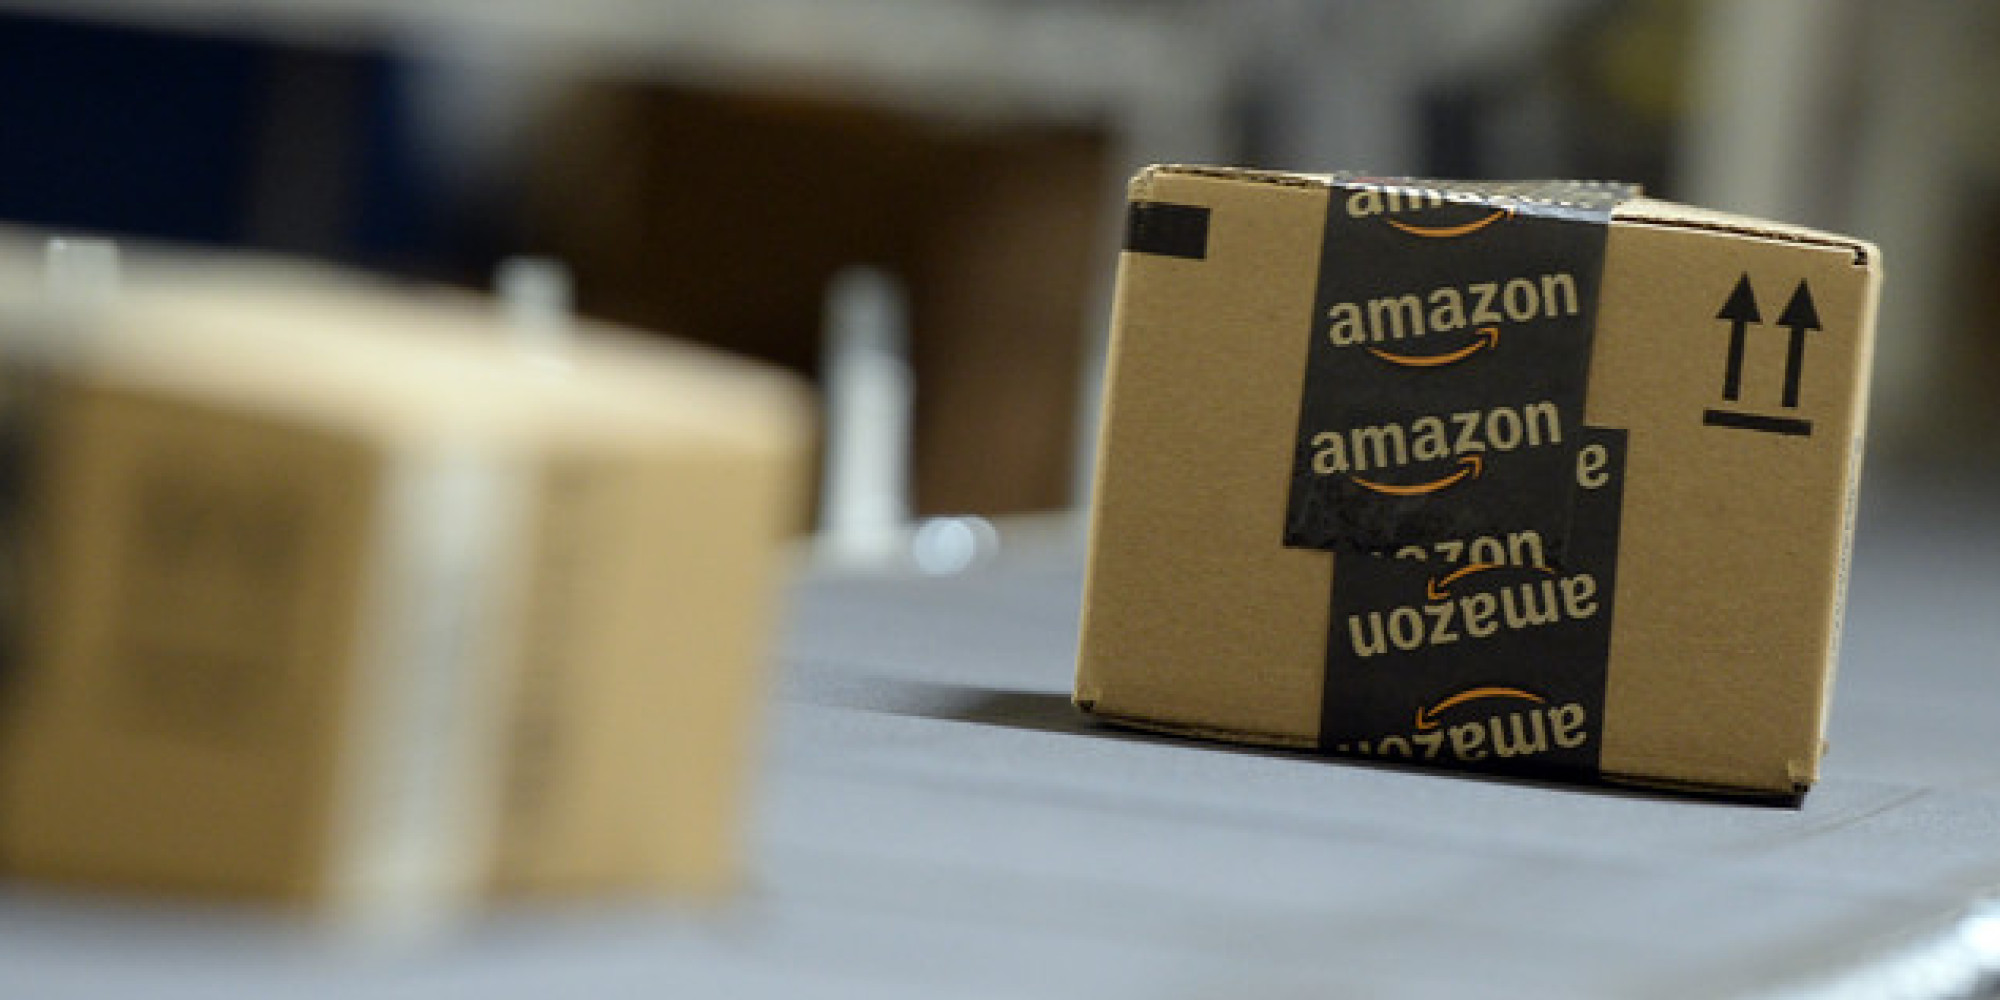 Amazon Shakes Up the Travel Industry